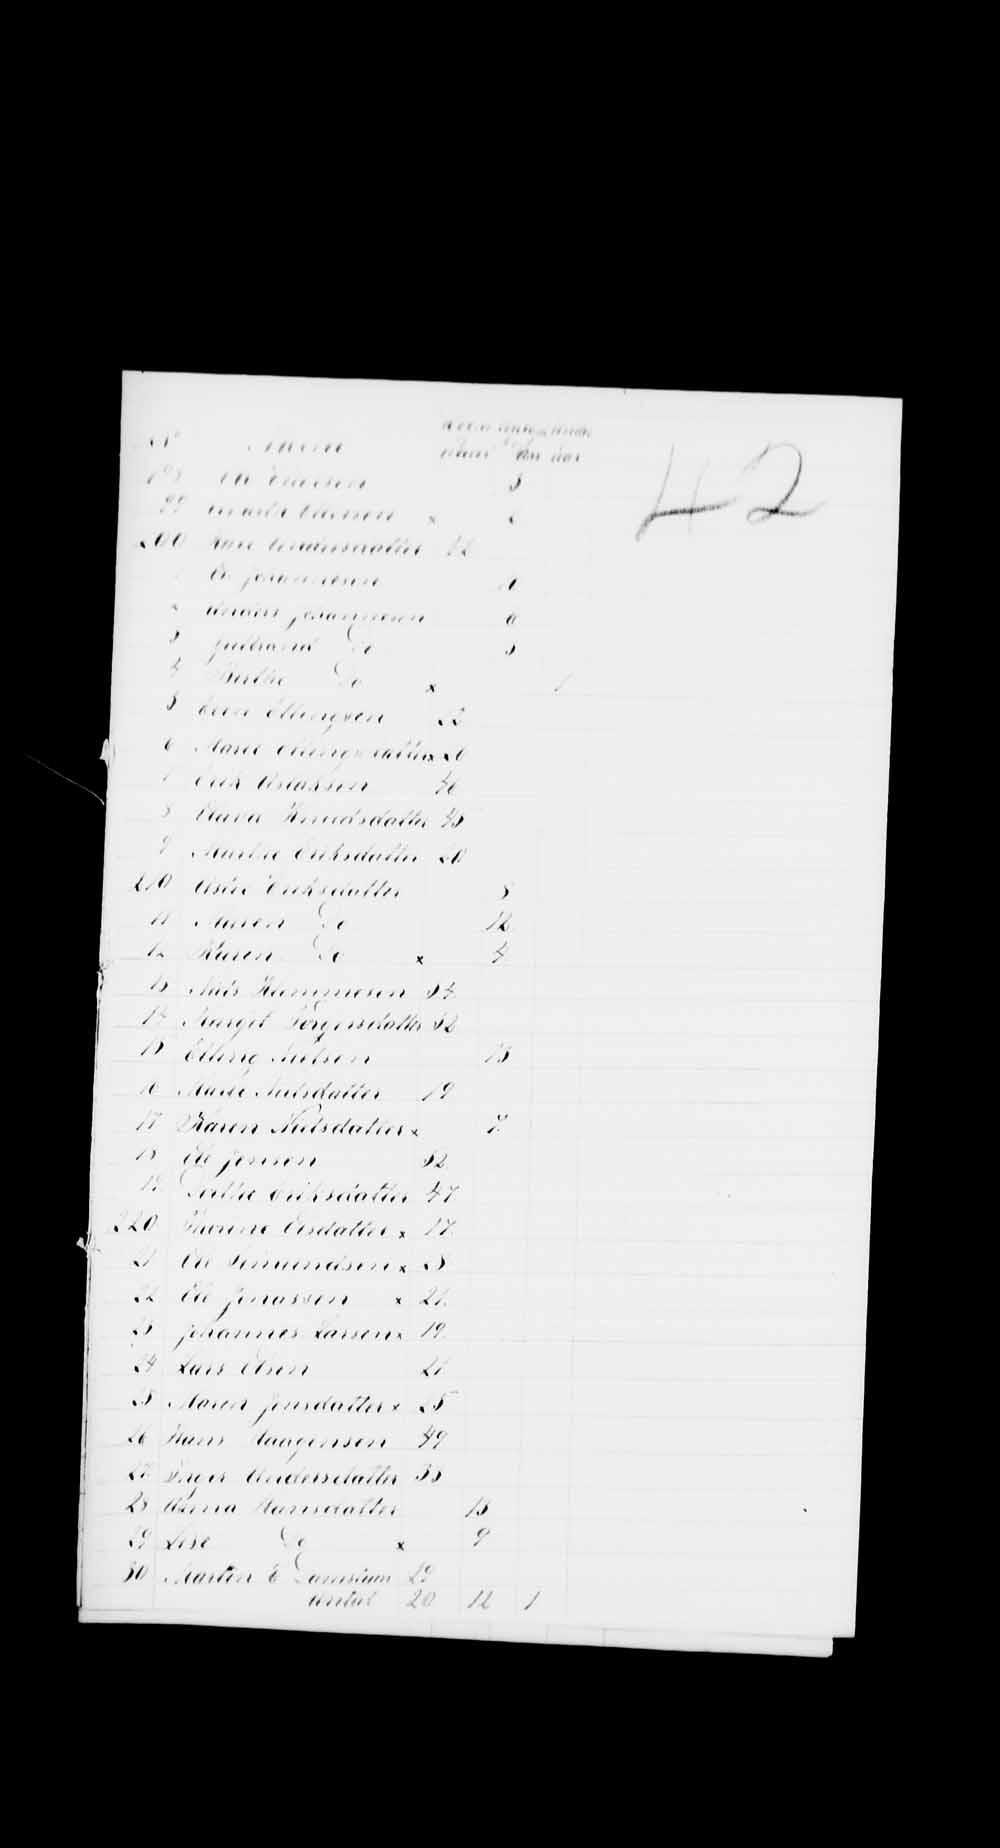 Digitized page of Passenger Lists for Image No.: e003530327